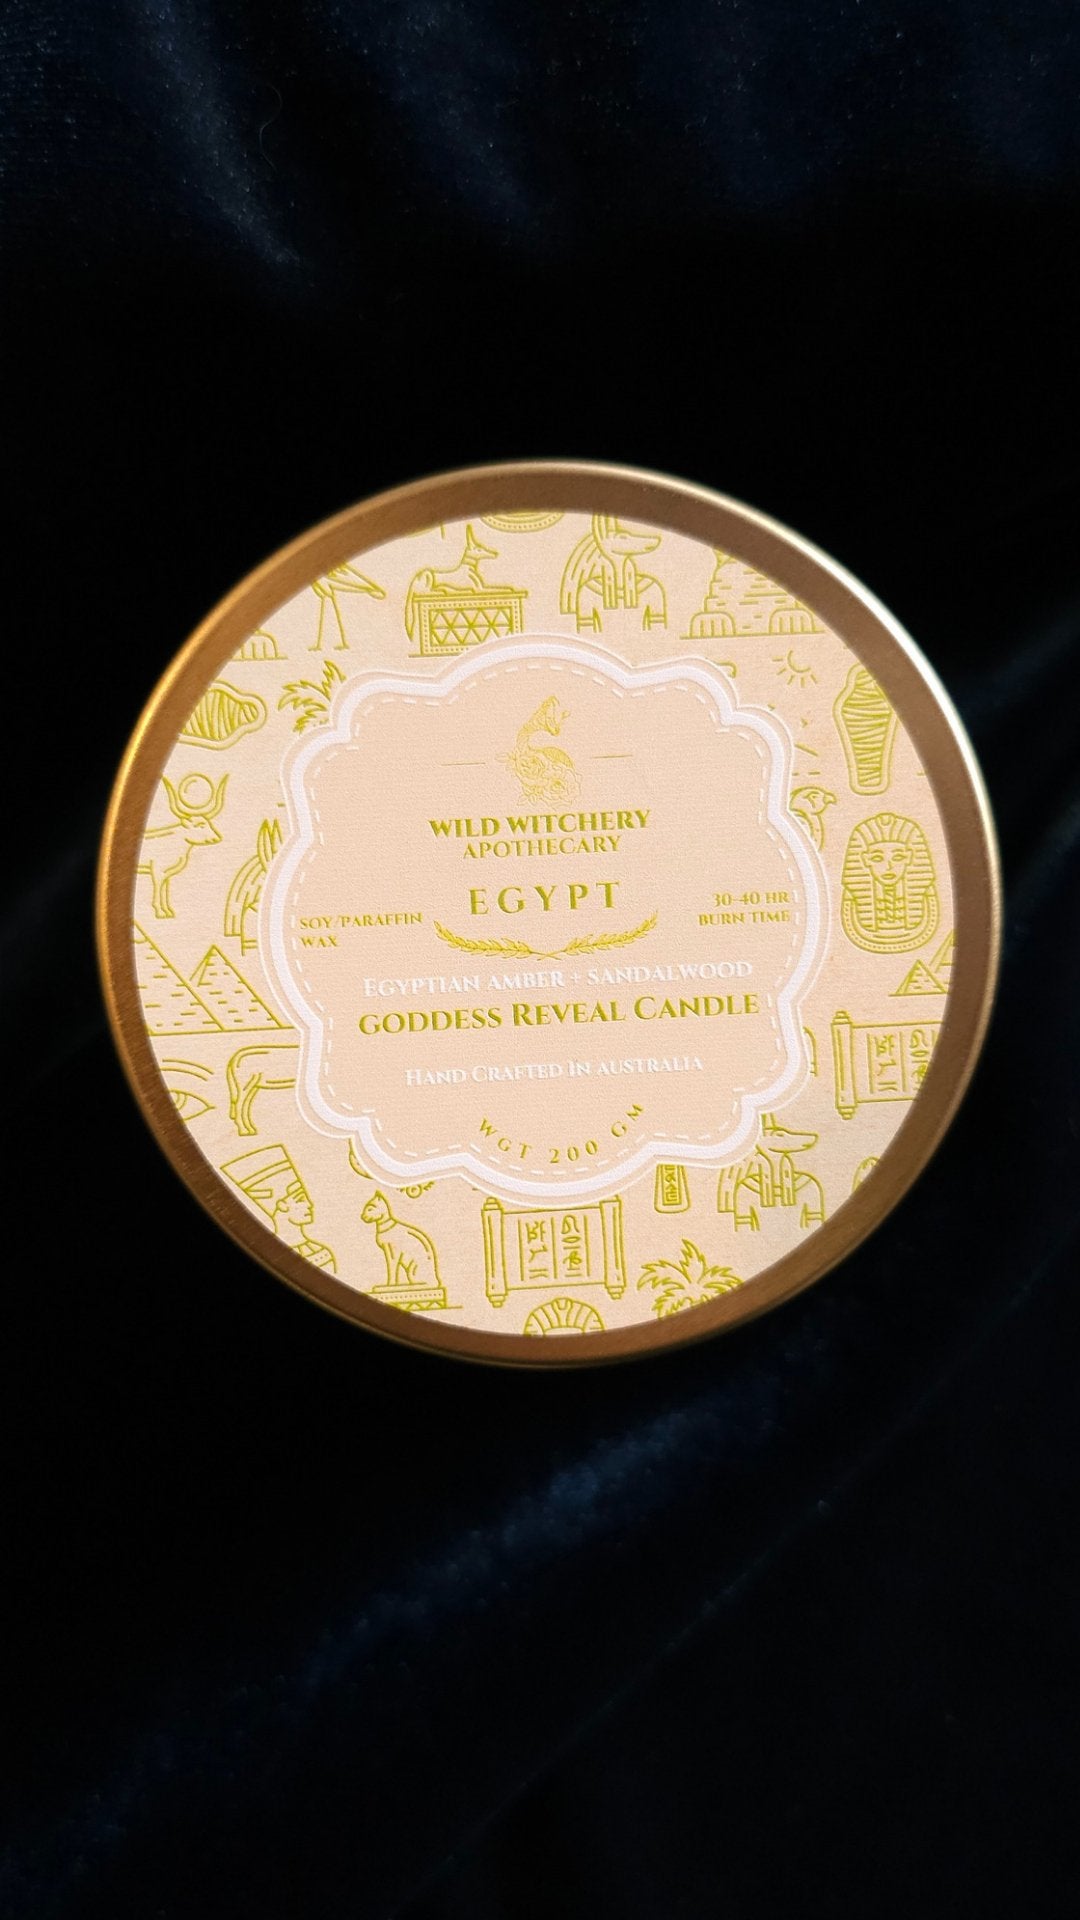 Goddess Reveal Candle | Egypt - Wild Witchery Apothecary